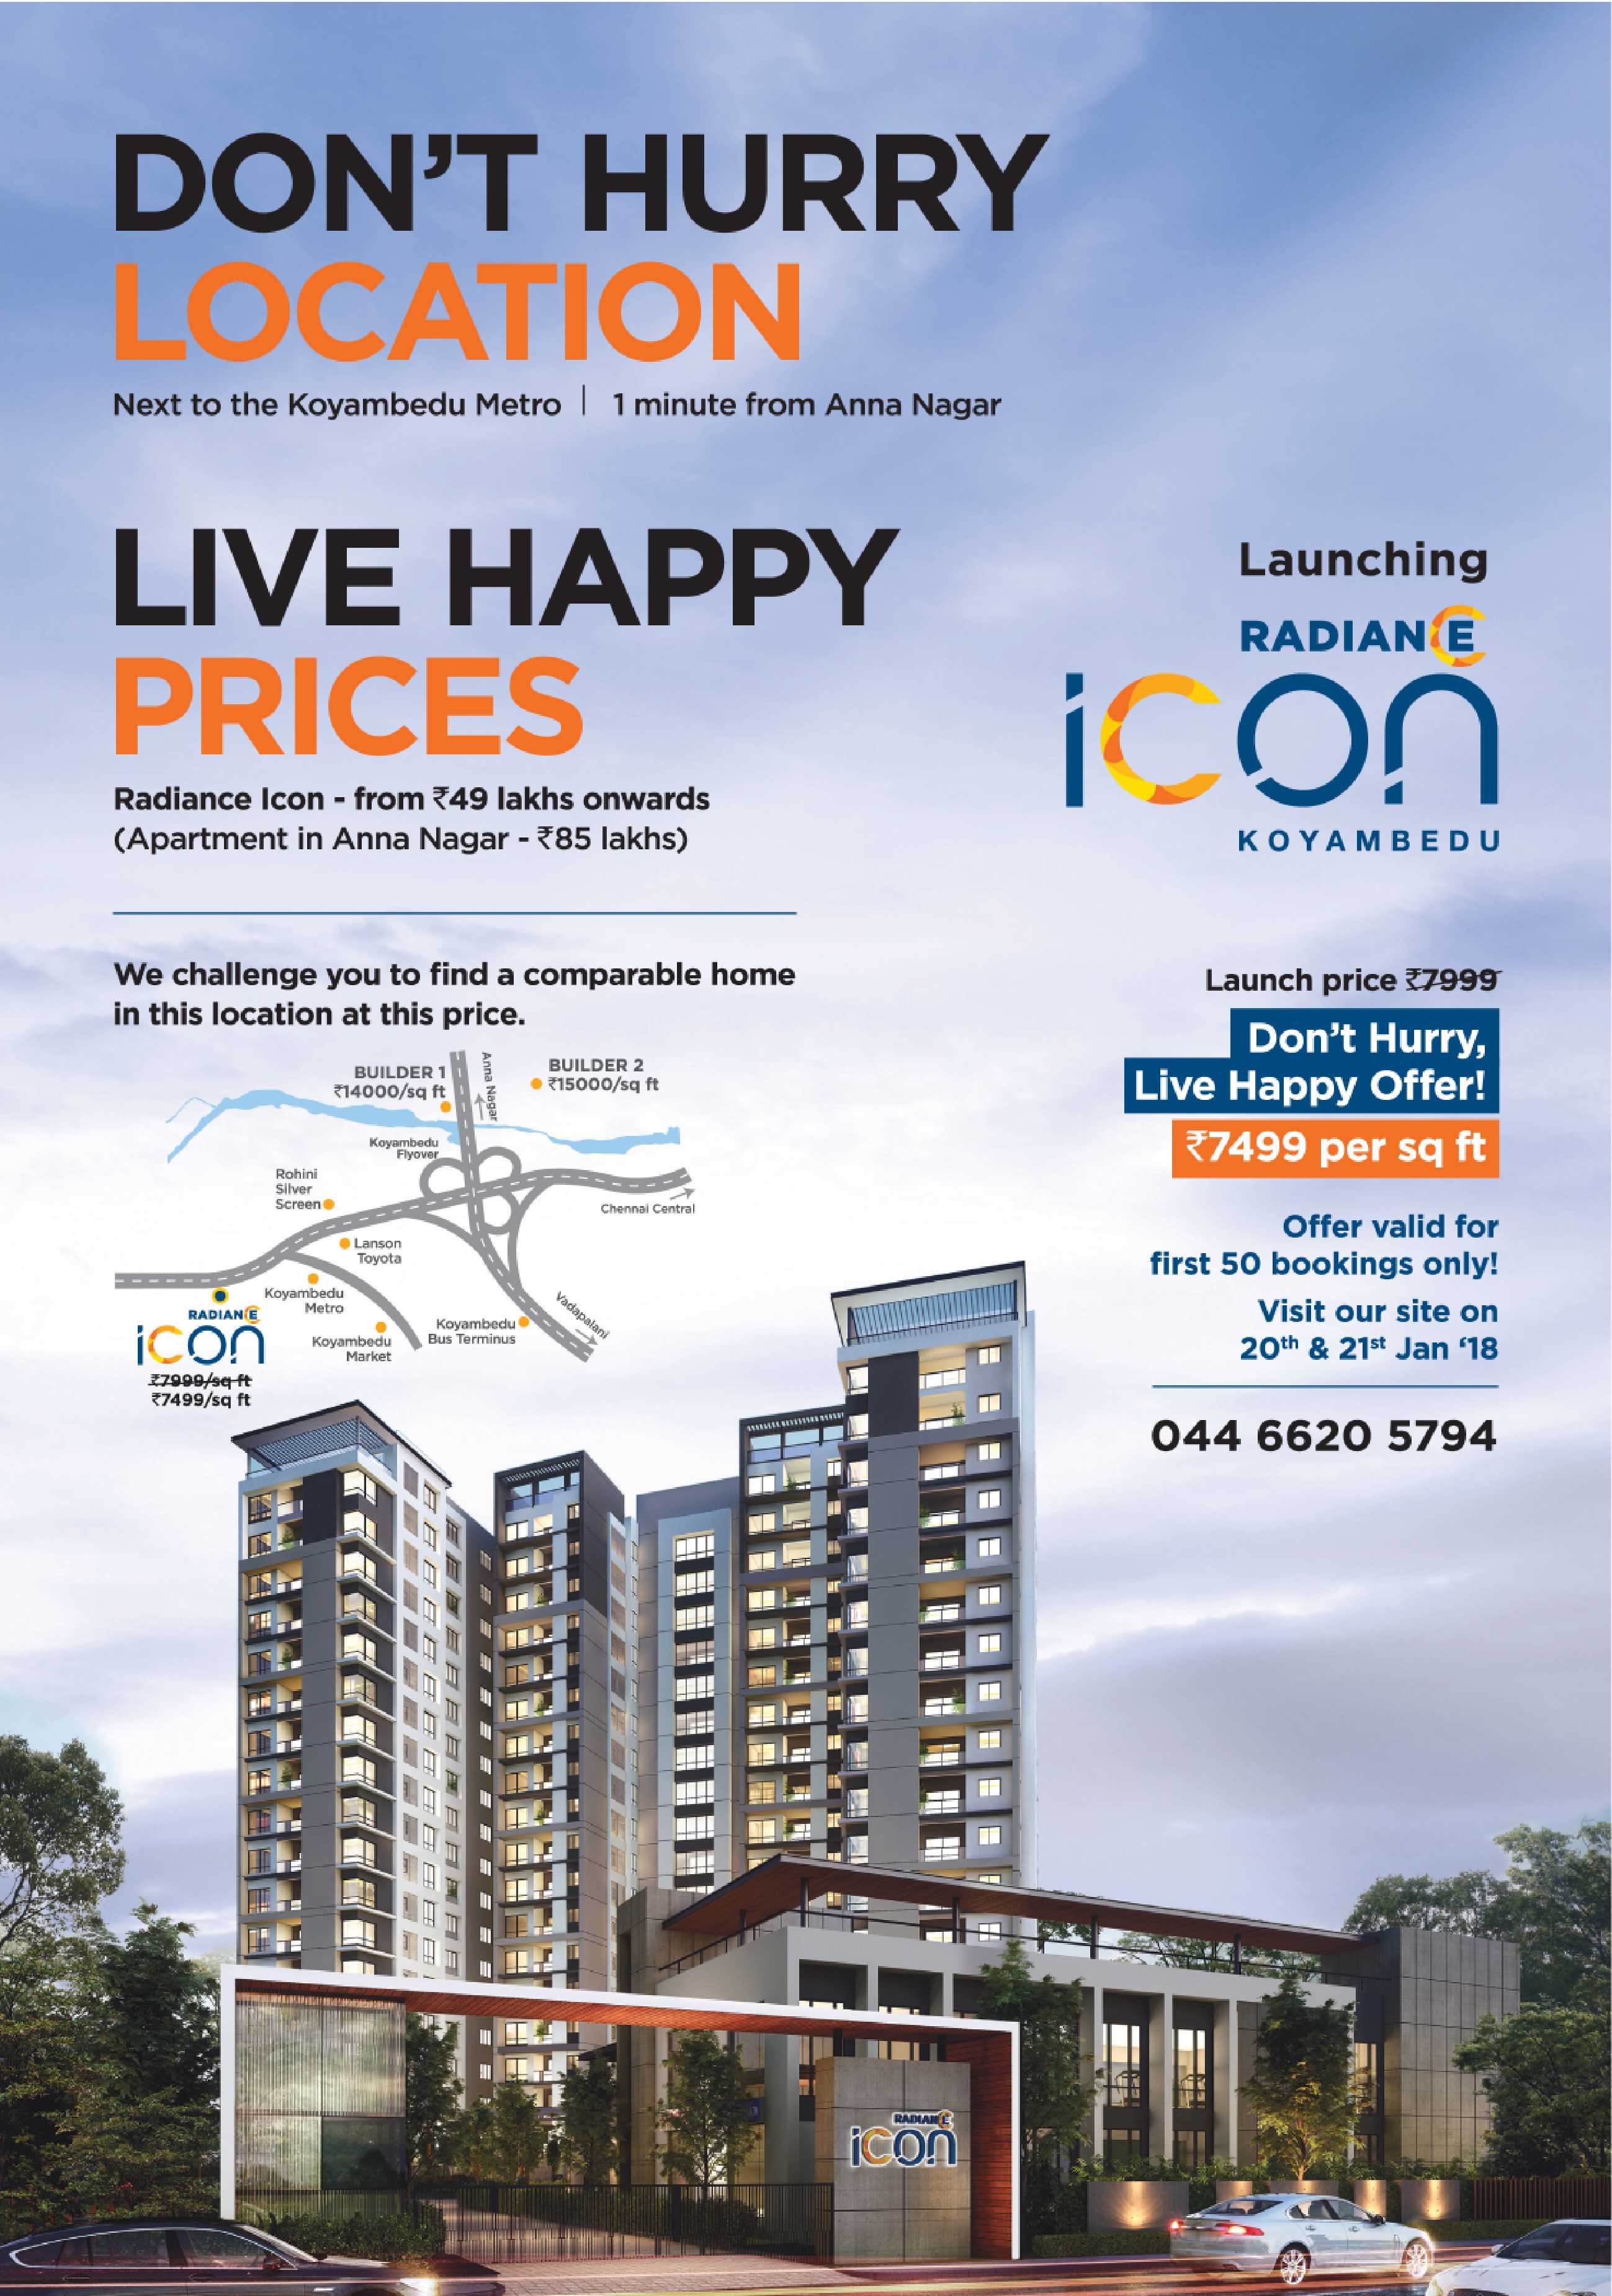 Launching Radian E Icon Do Not Hurry Location Live Happy Prices Ad ...